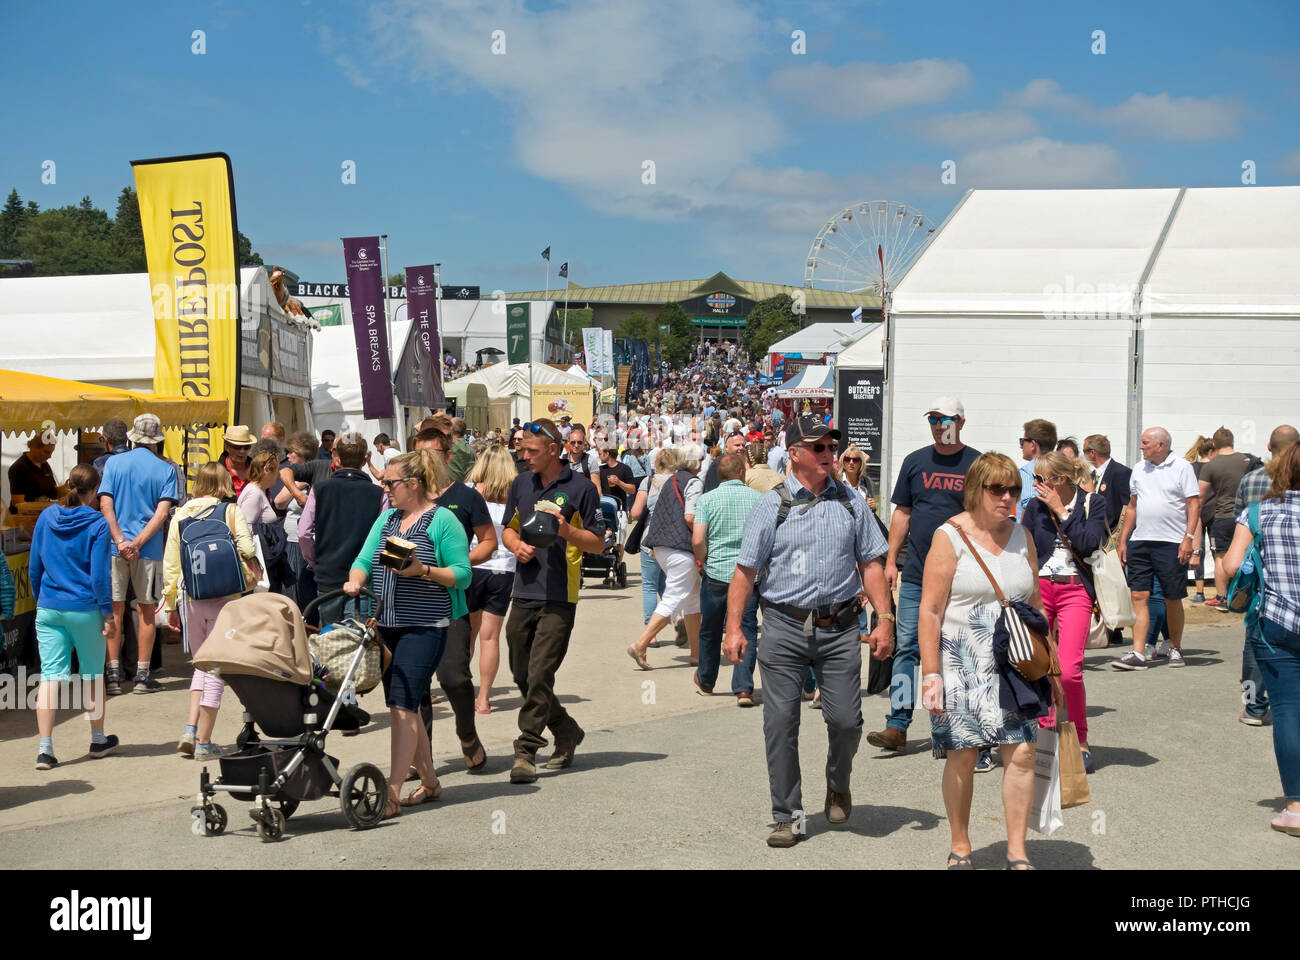 Visitors people at the Great Yorkshire Show in summer busy showground Harrogate North Yorkshire England UK United Kingdom GB Great Britain Stock Photo